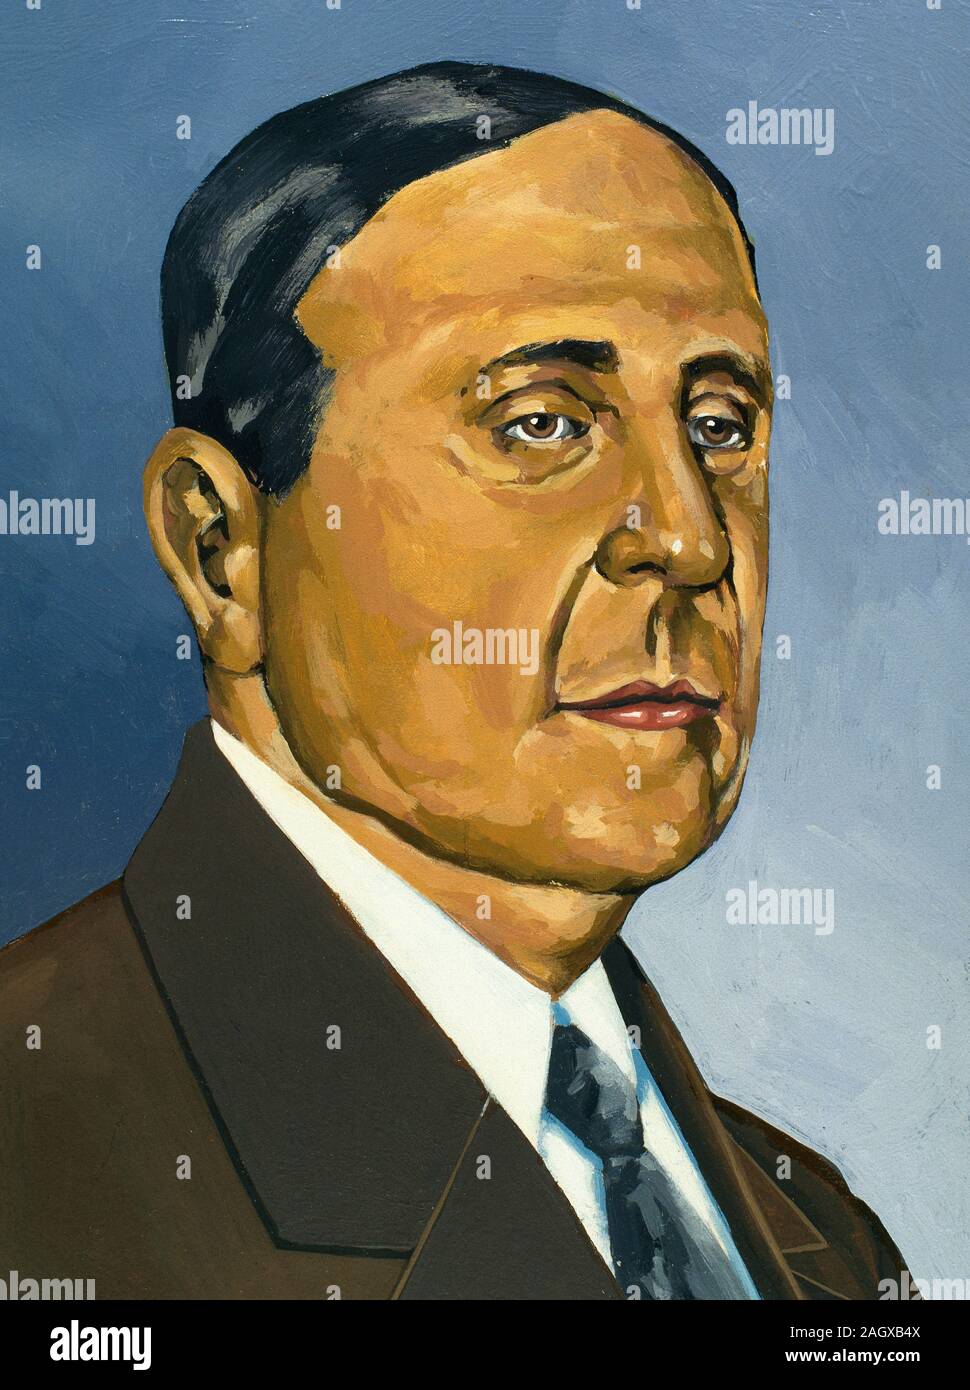 Jose Augusto Trinidad Martinez Ruiz, known by his pseudonym Azorin (1873-1967). Spanish novelist. One of the members of the Generation of 98. Modernist style.  Portrait. Drawing and watercolor by the Spanish illustrator Francisco Fonollosa (d. late 20th century). Stock Photo